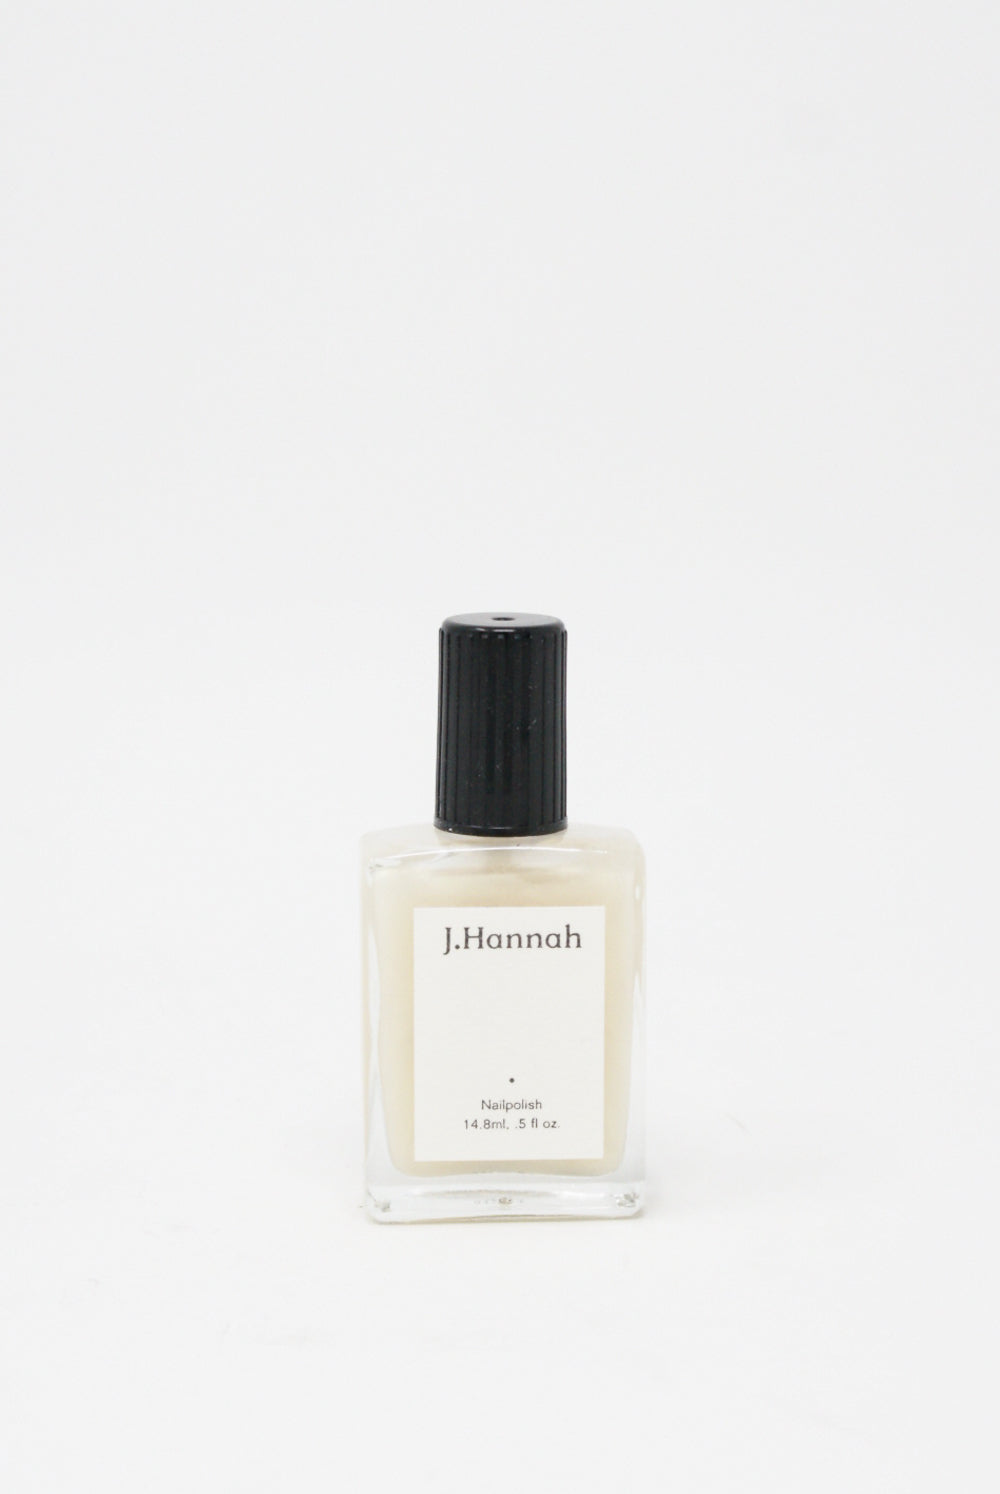 A small bottle of Akoya nail polish by J Hannah on a white background.